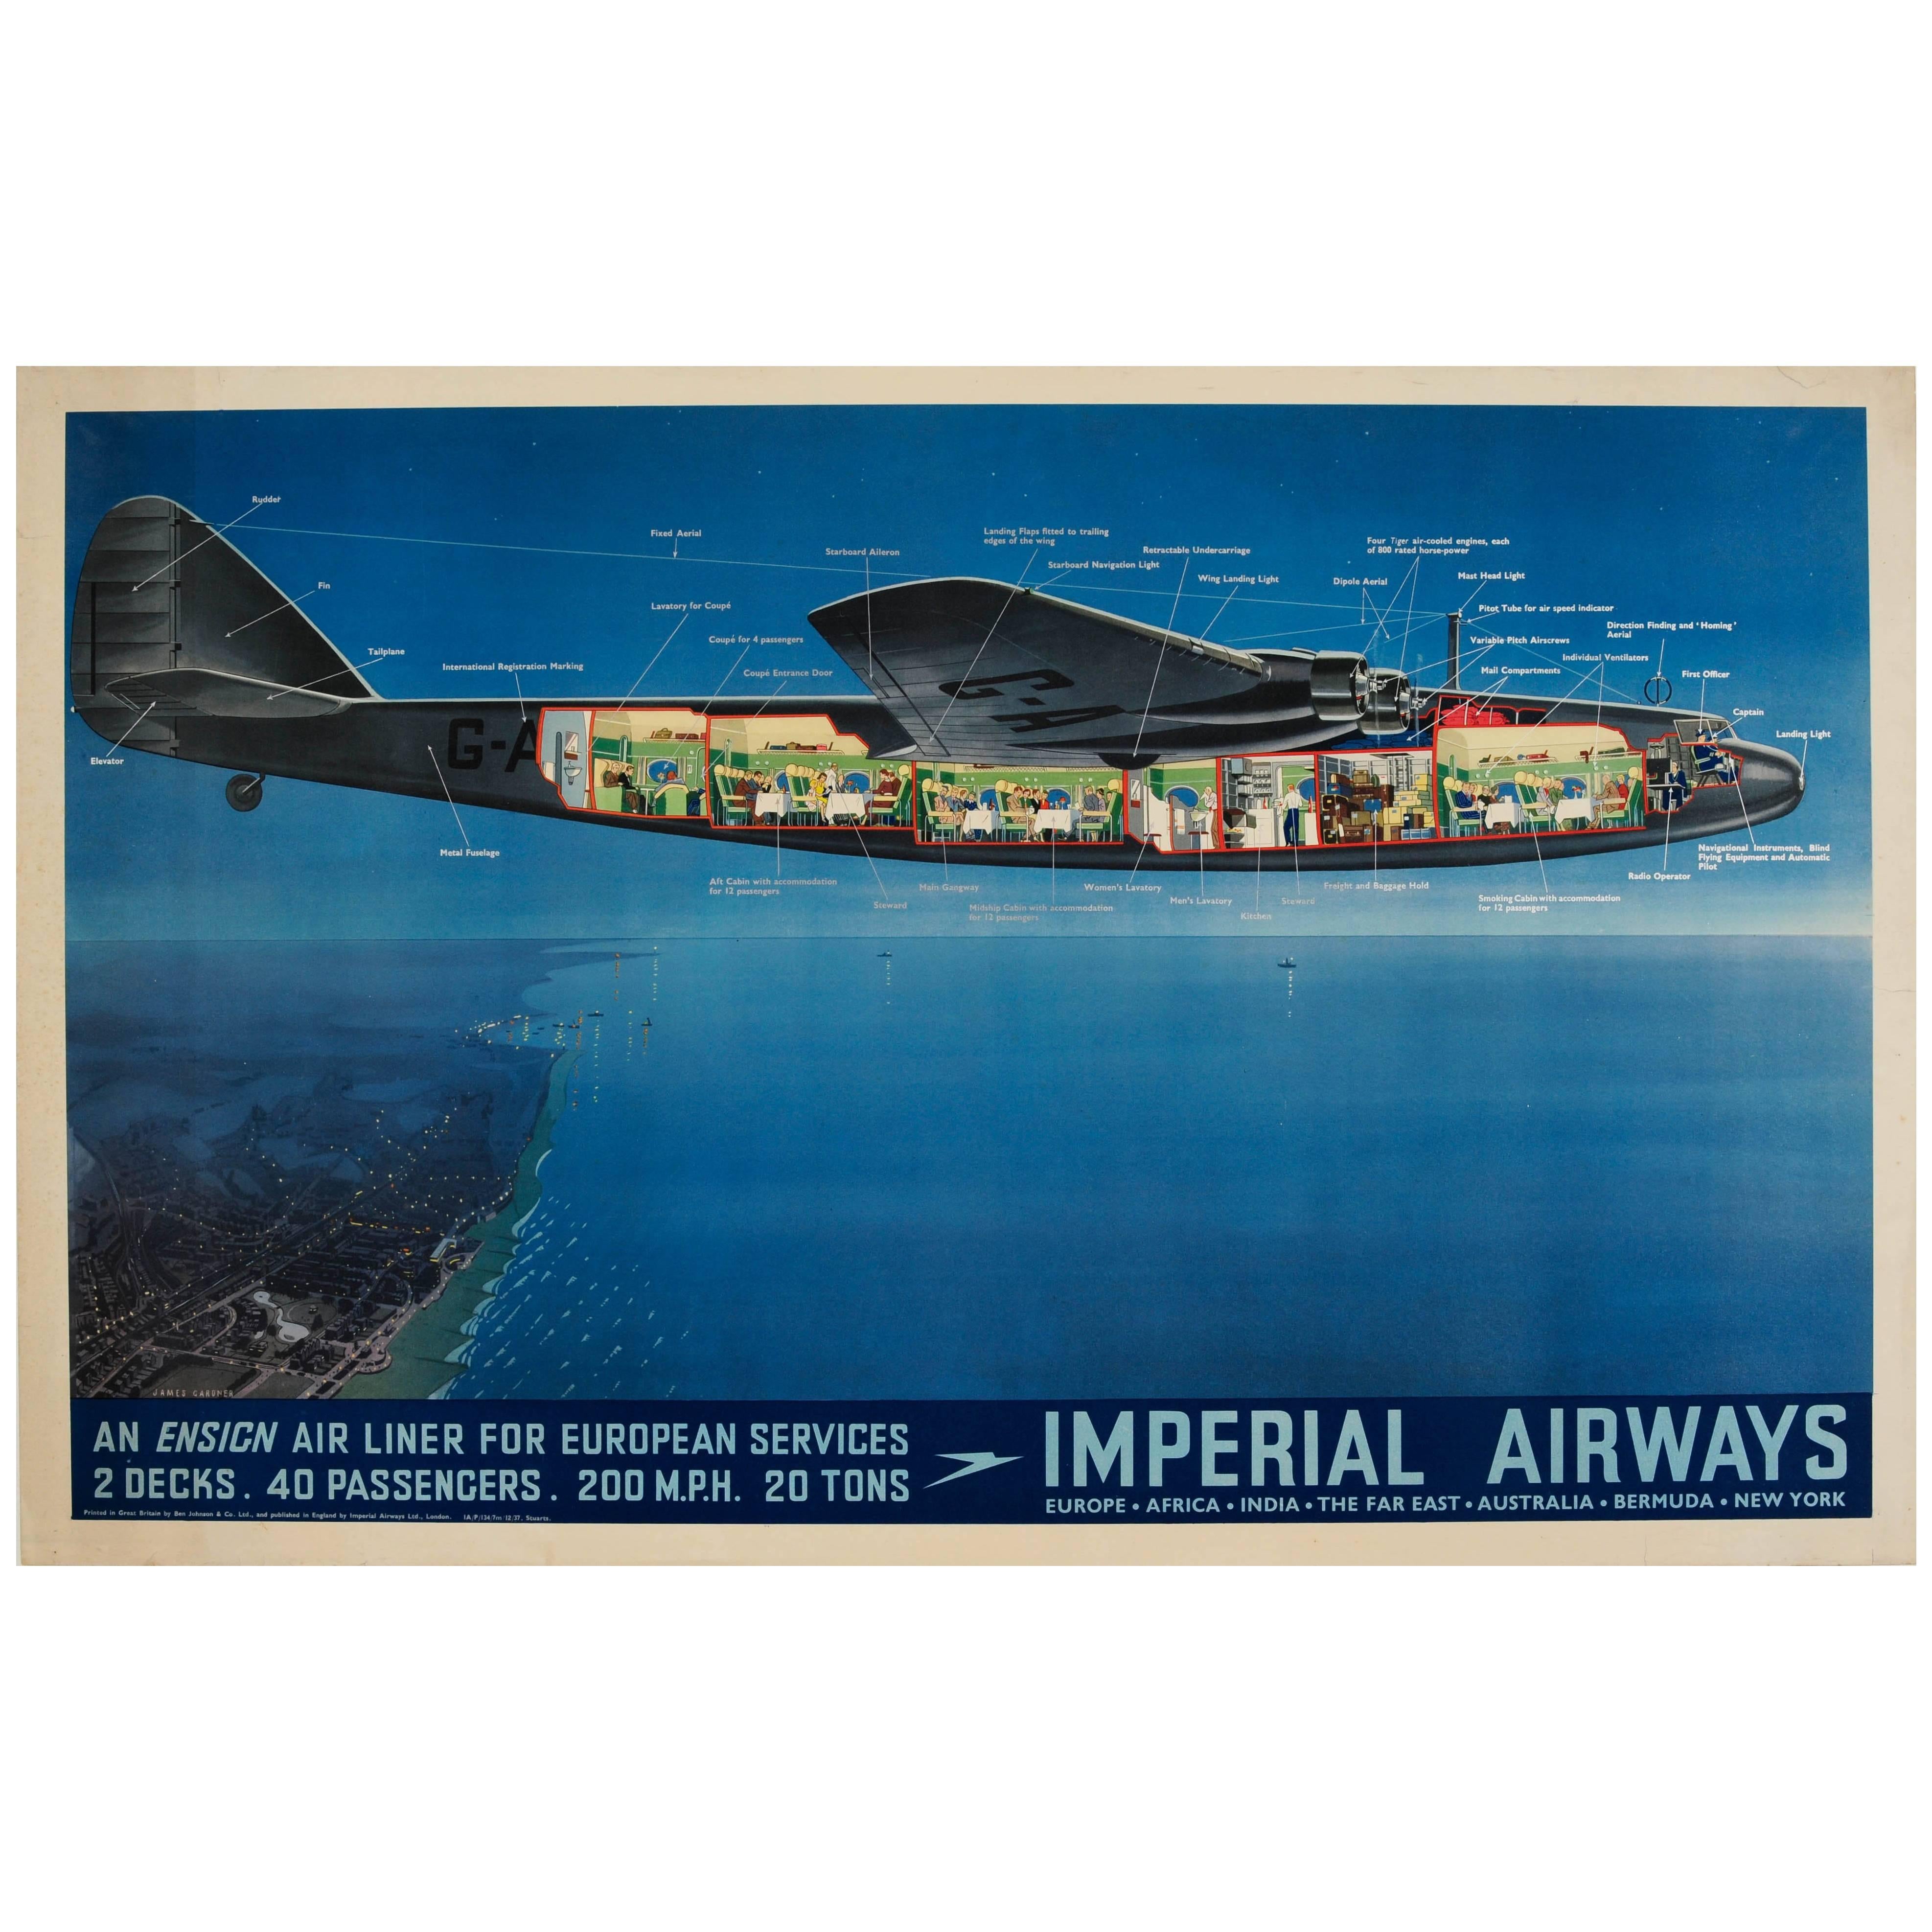 Original Vintage Imperial Airways Ensign Air Liner Travel Poster Europe Services For Sale